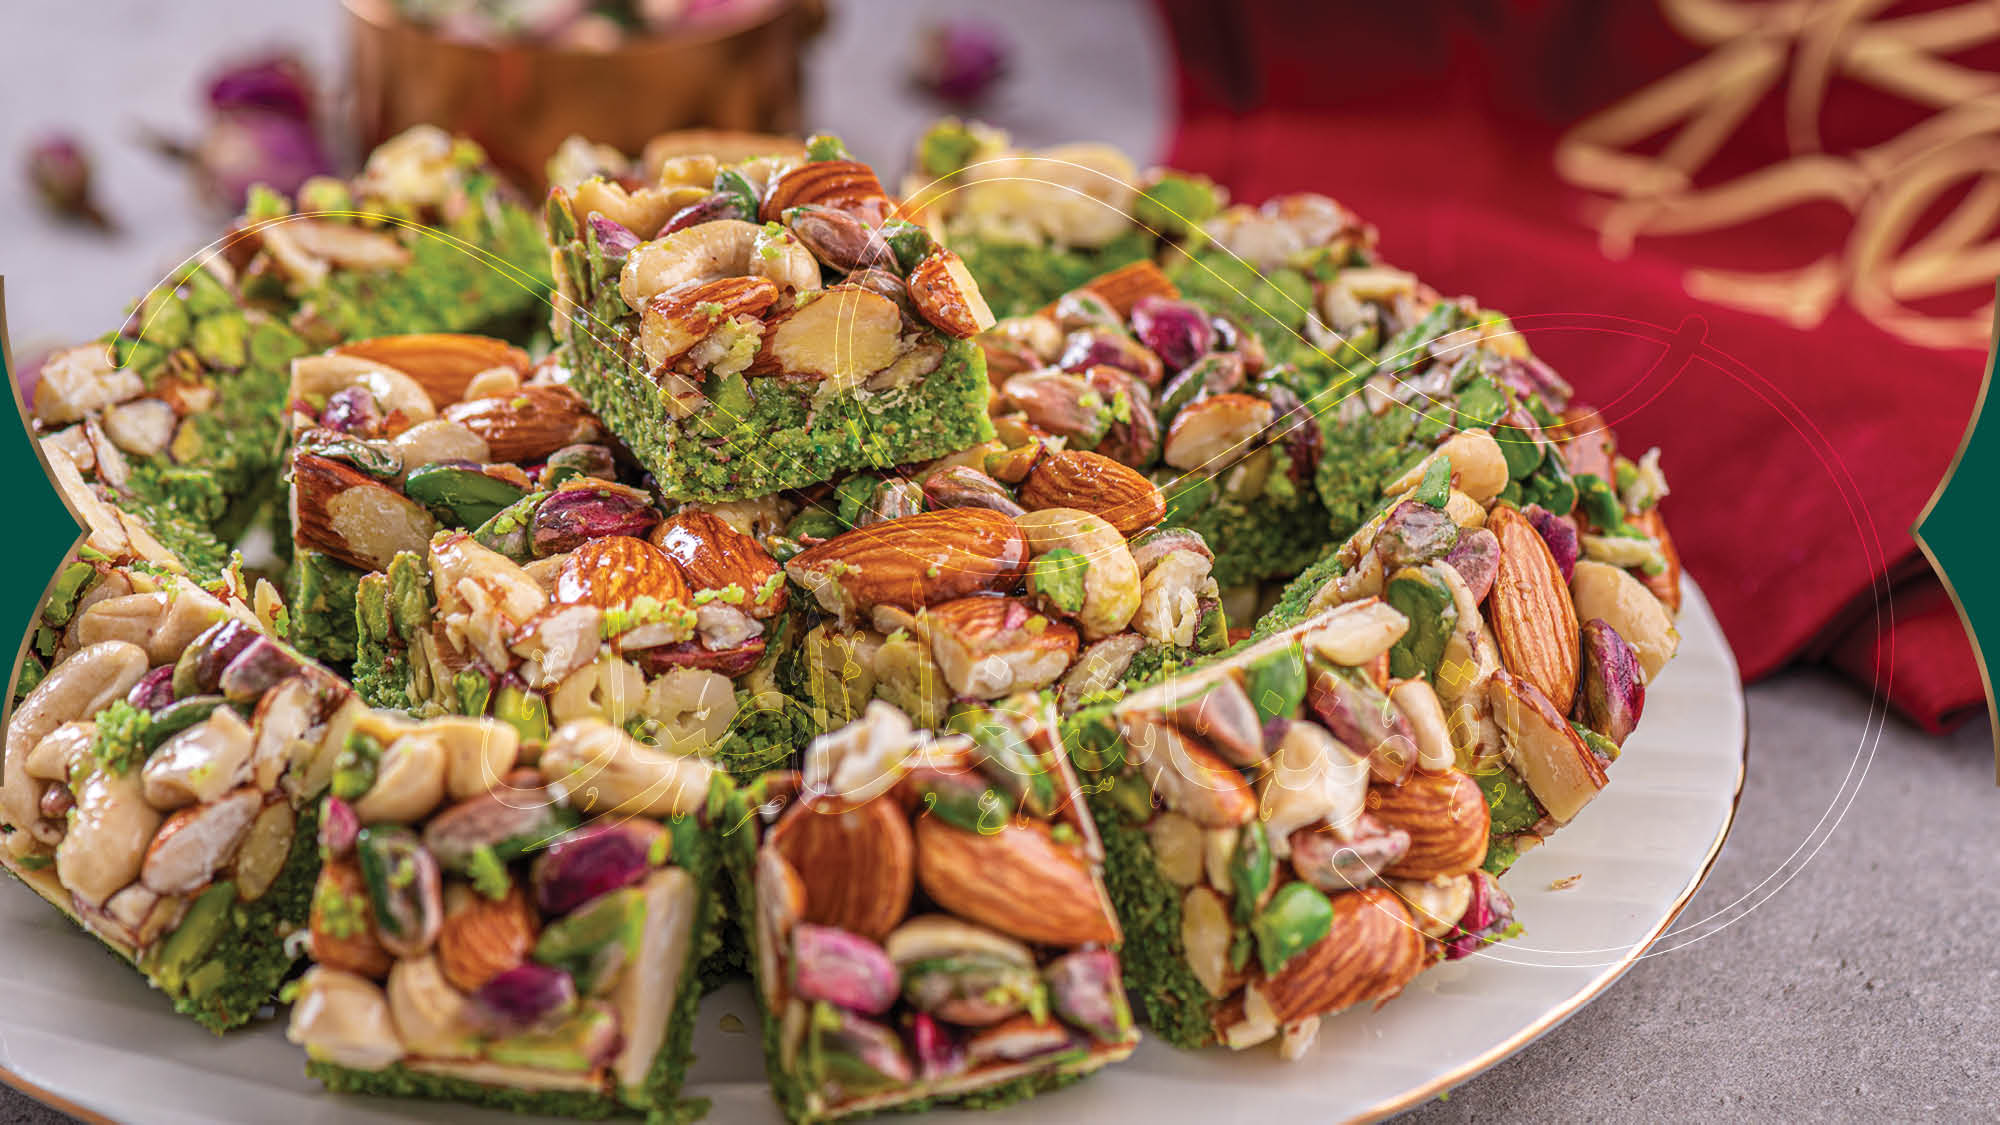 Where Every Bite Tells a Story: A Tantalizing Array of Arabic Sweets